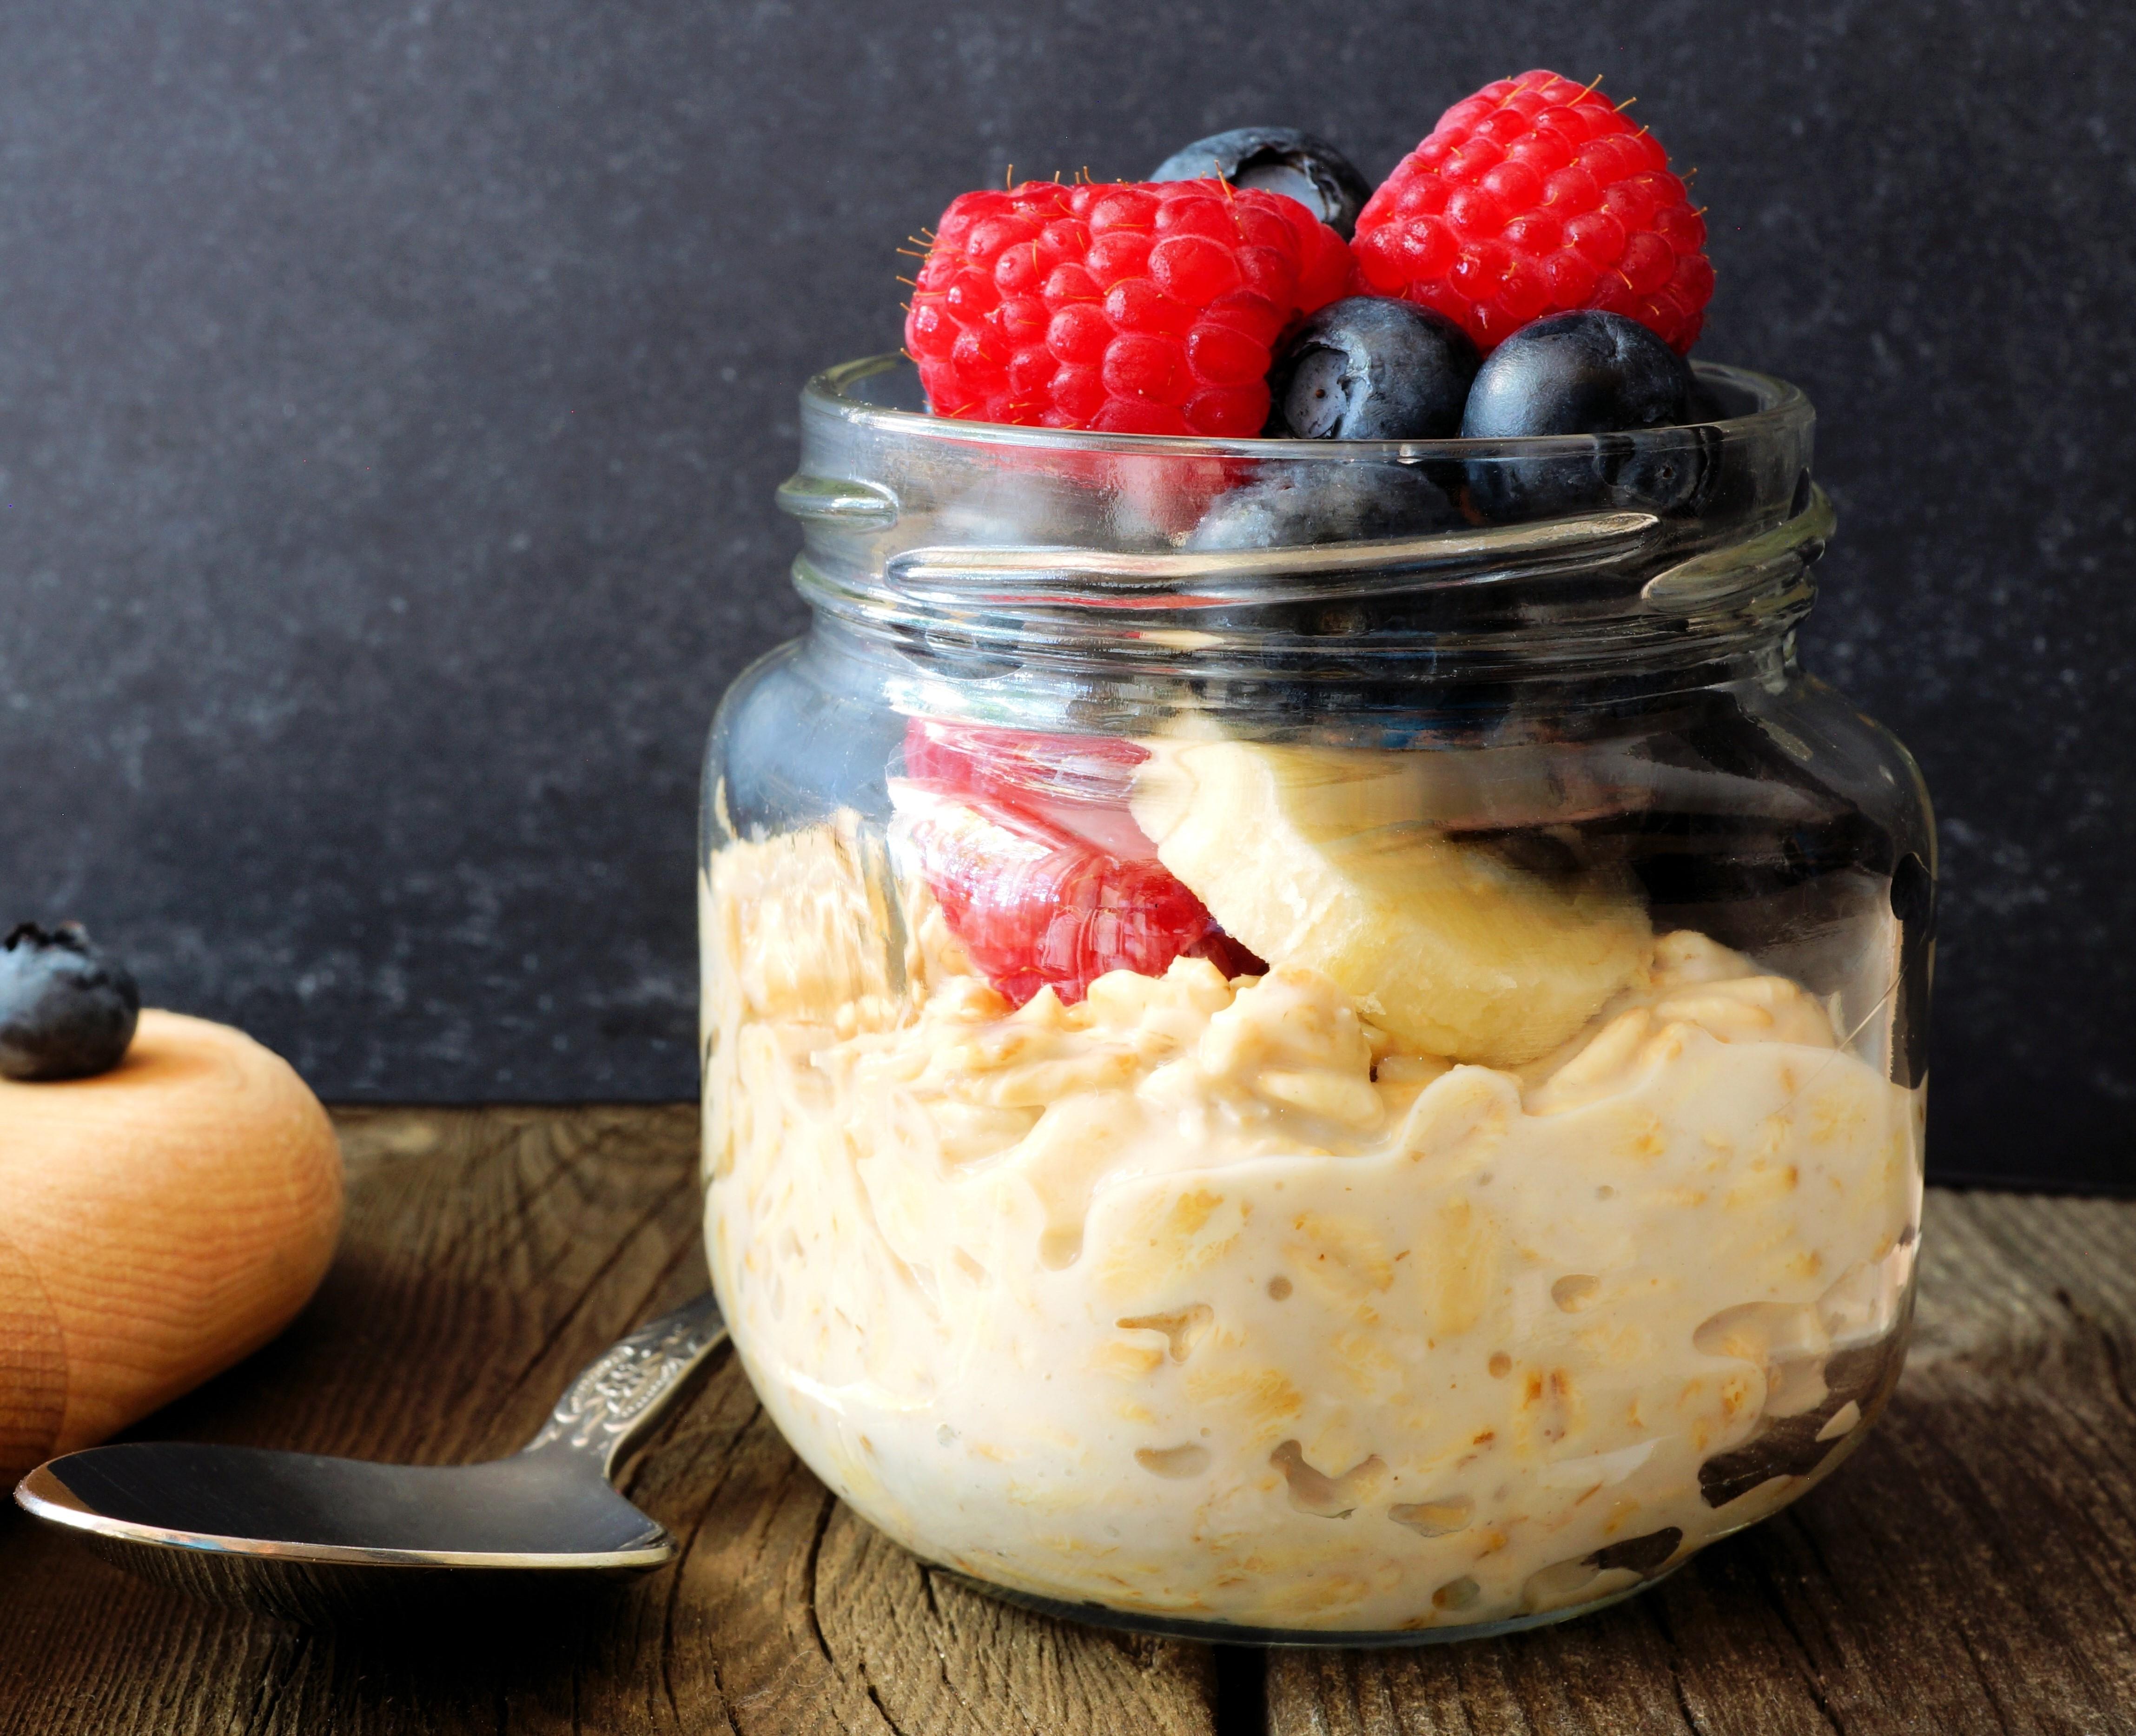 Oats soaked in milk in a small glass jar and topped with blueberries, raspberries, and banana.